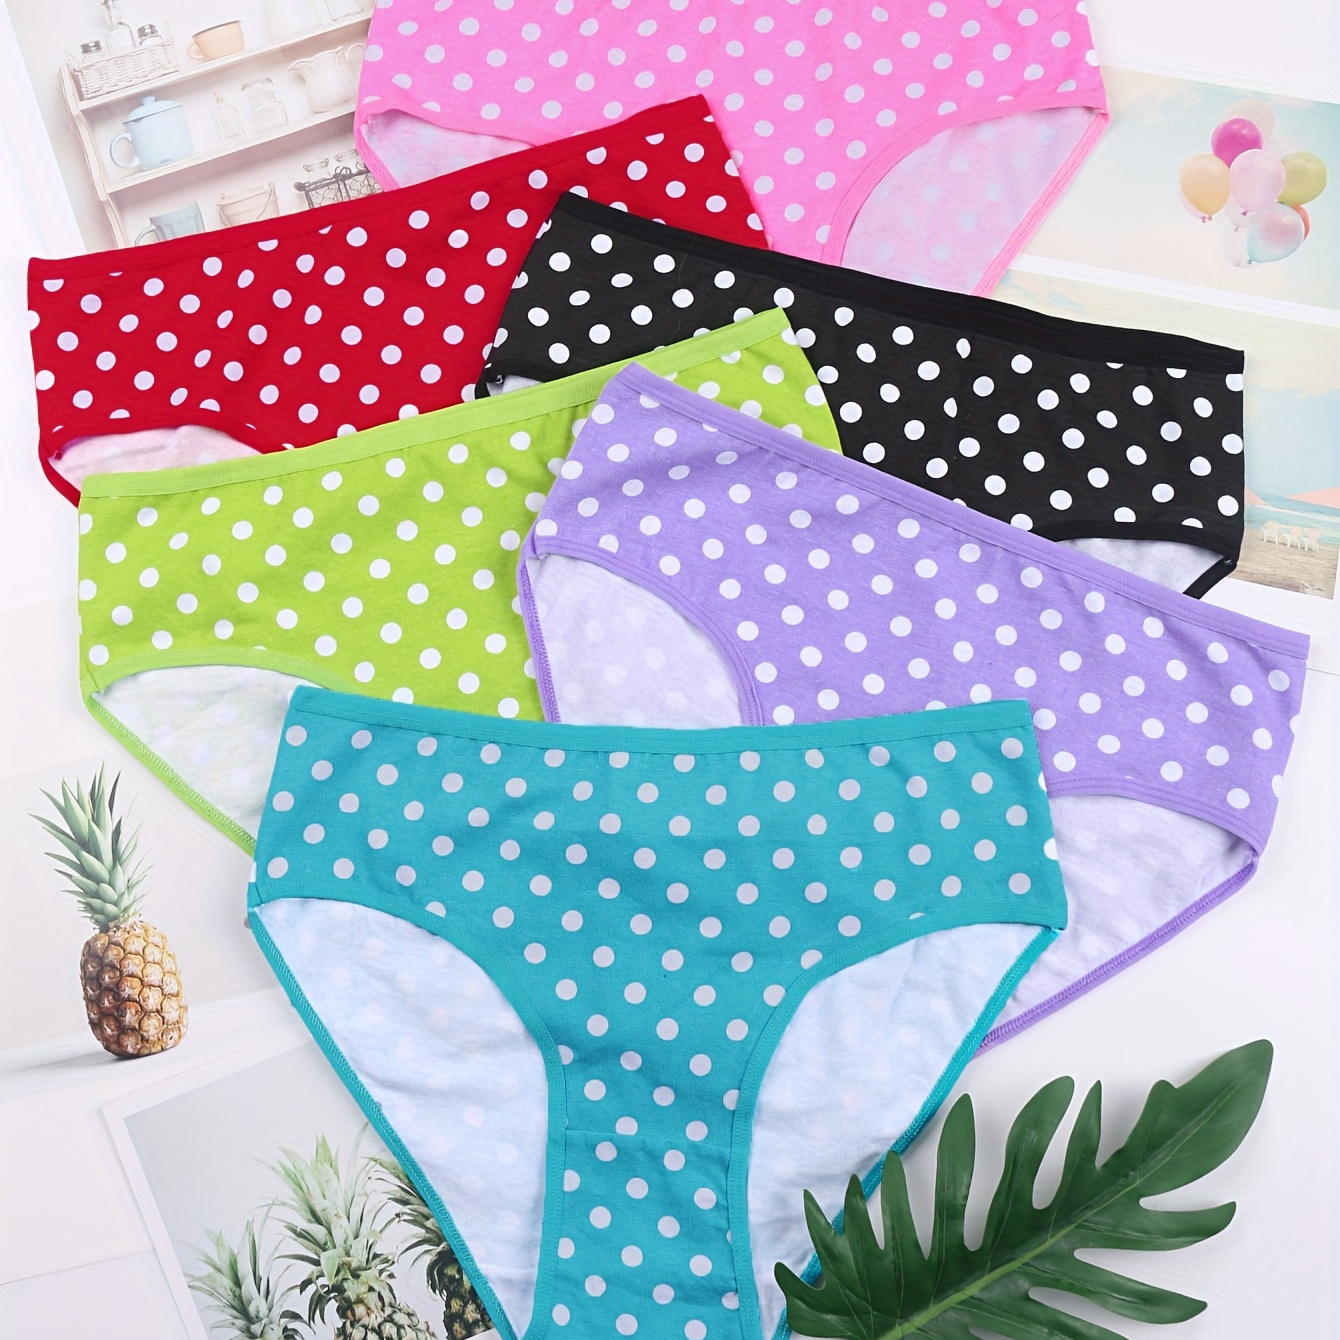 

6pcs Polka Dot Print Briefs, Comfy Breathable Stretchy Intimates Panties, Women's Lingerie & Underwear